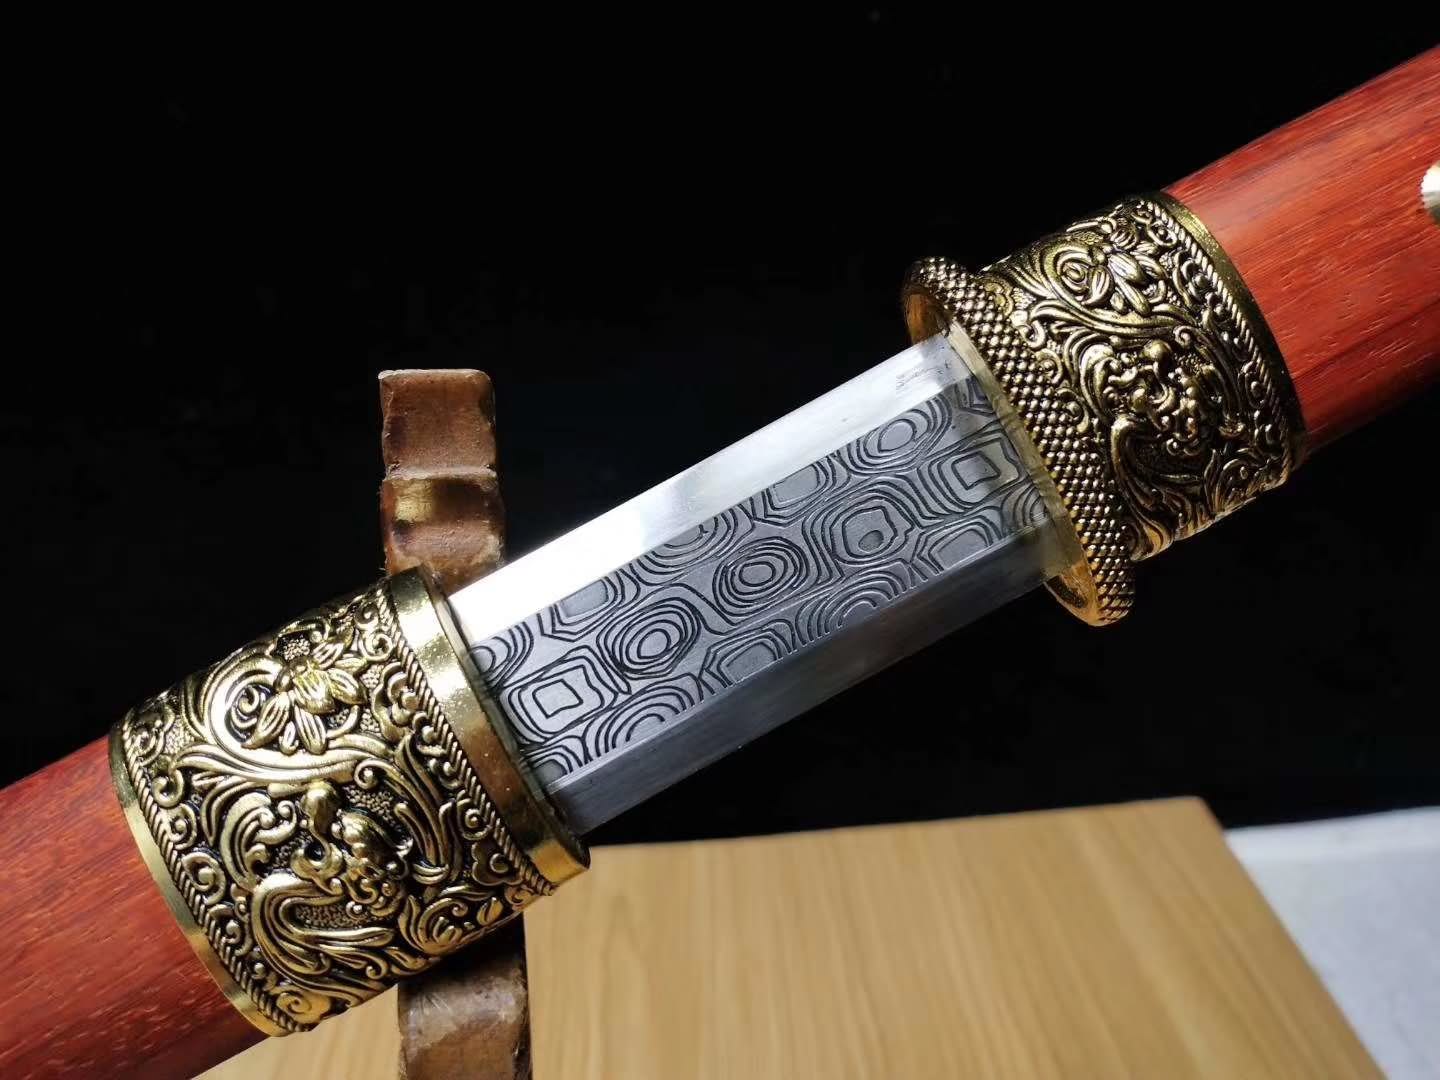 Hexahedral han jian,High carbon steel etch blade,Alloy fittings - Chinese sword shop